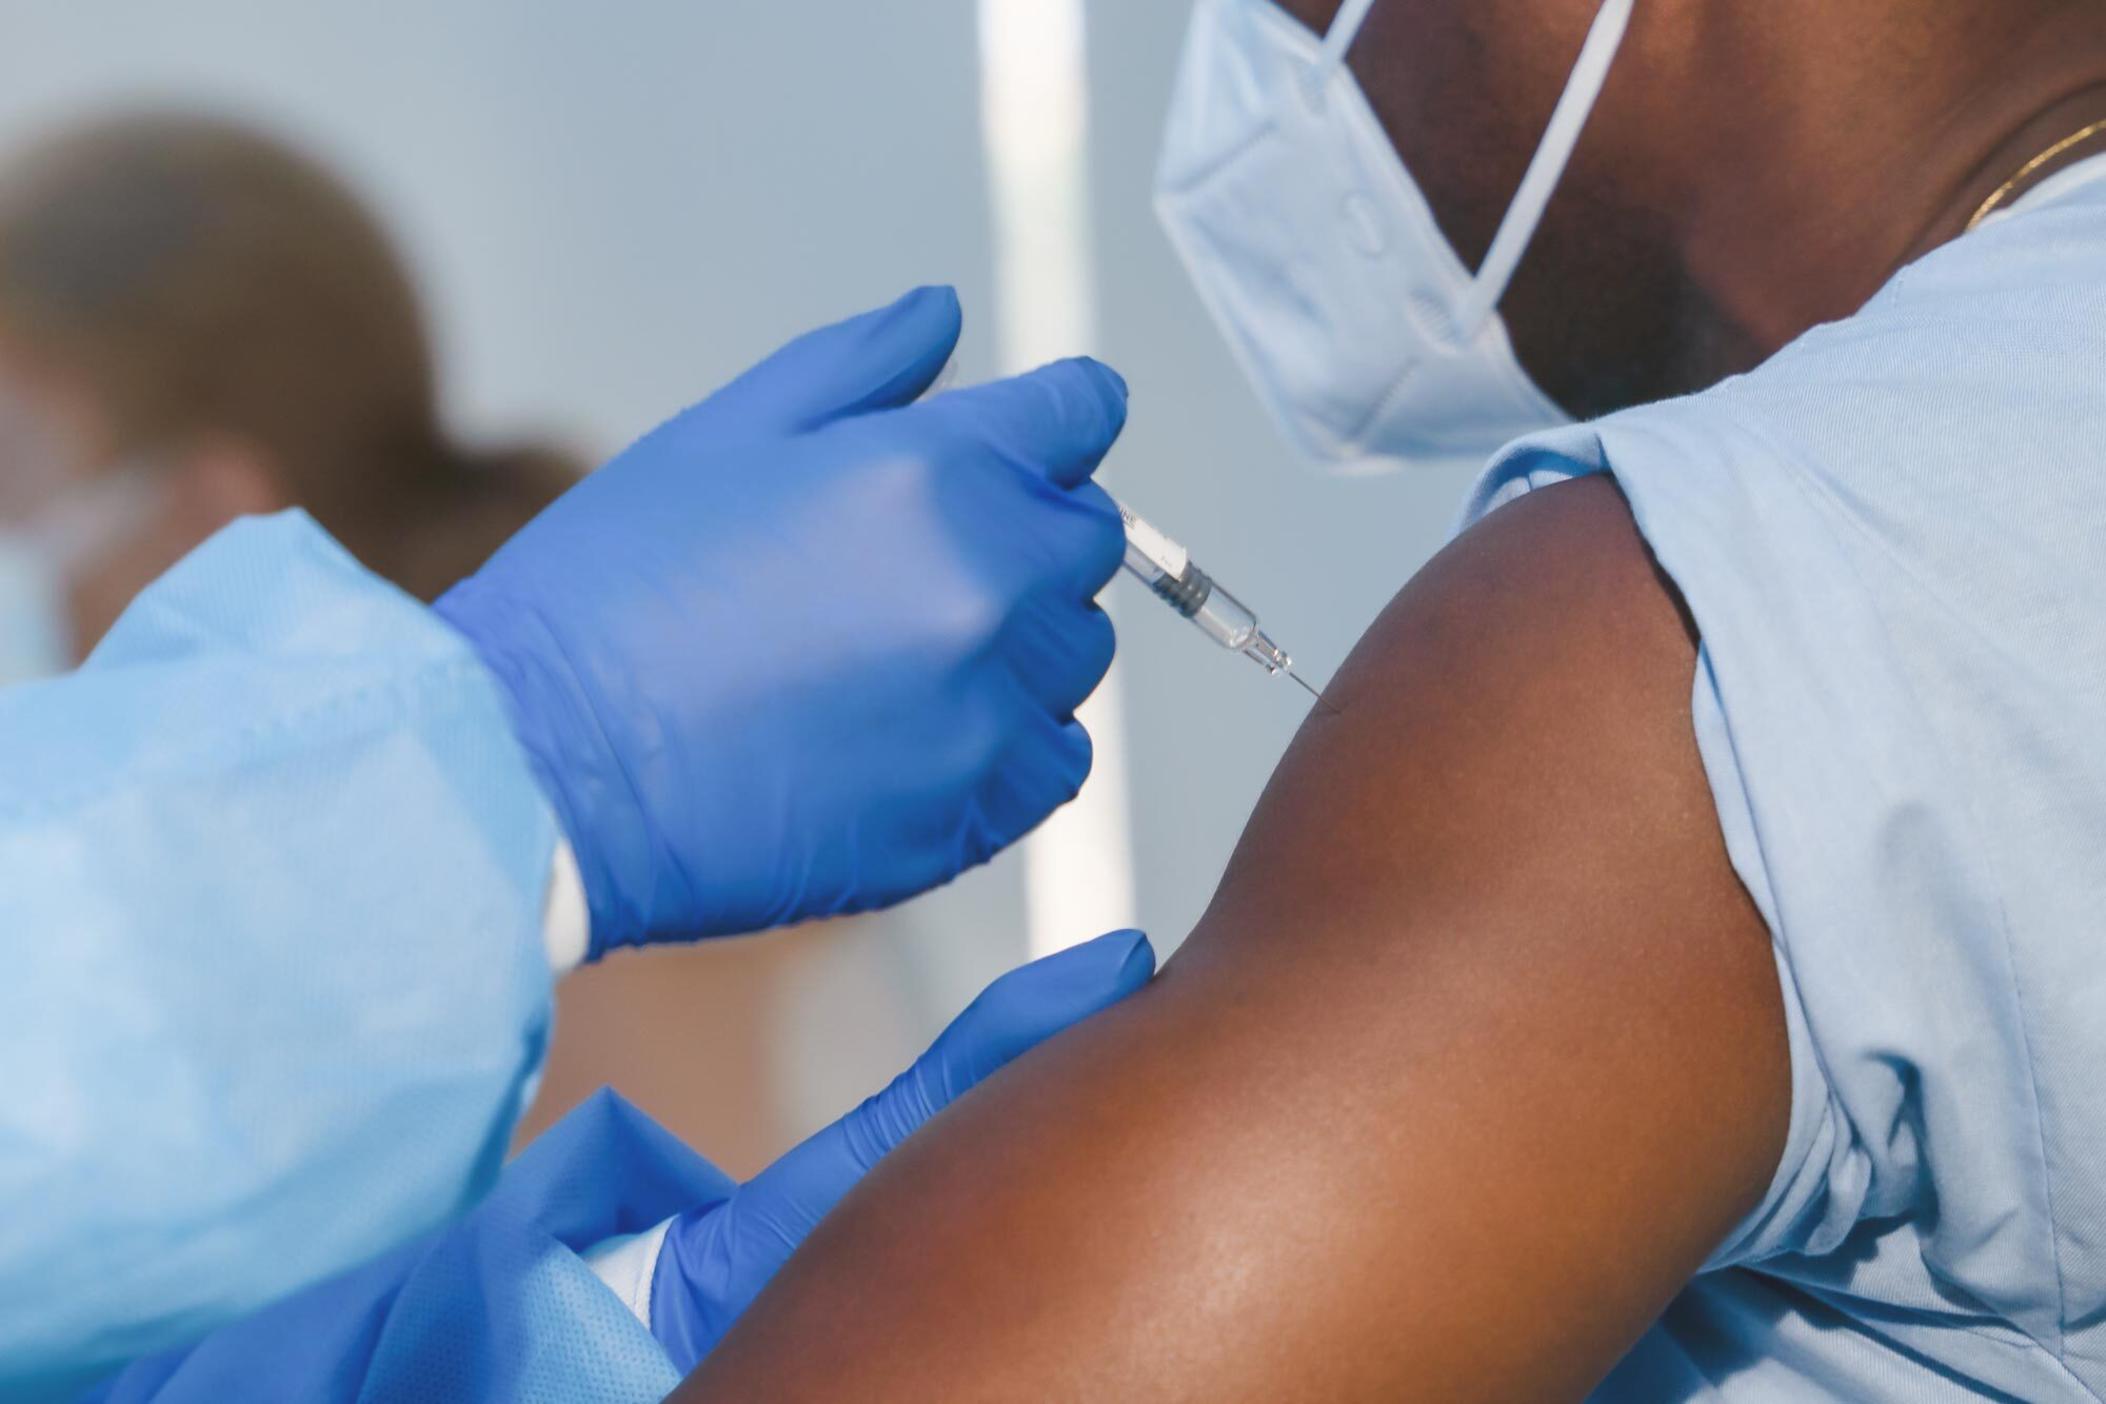 A vaccine being administered with a syringe.